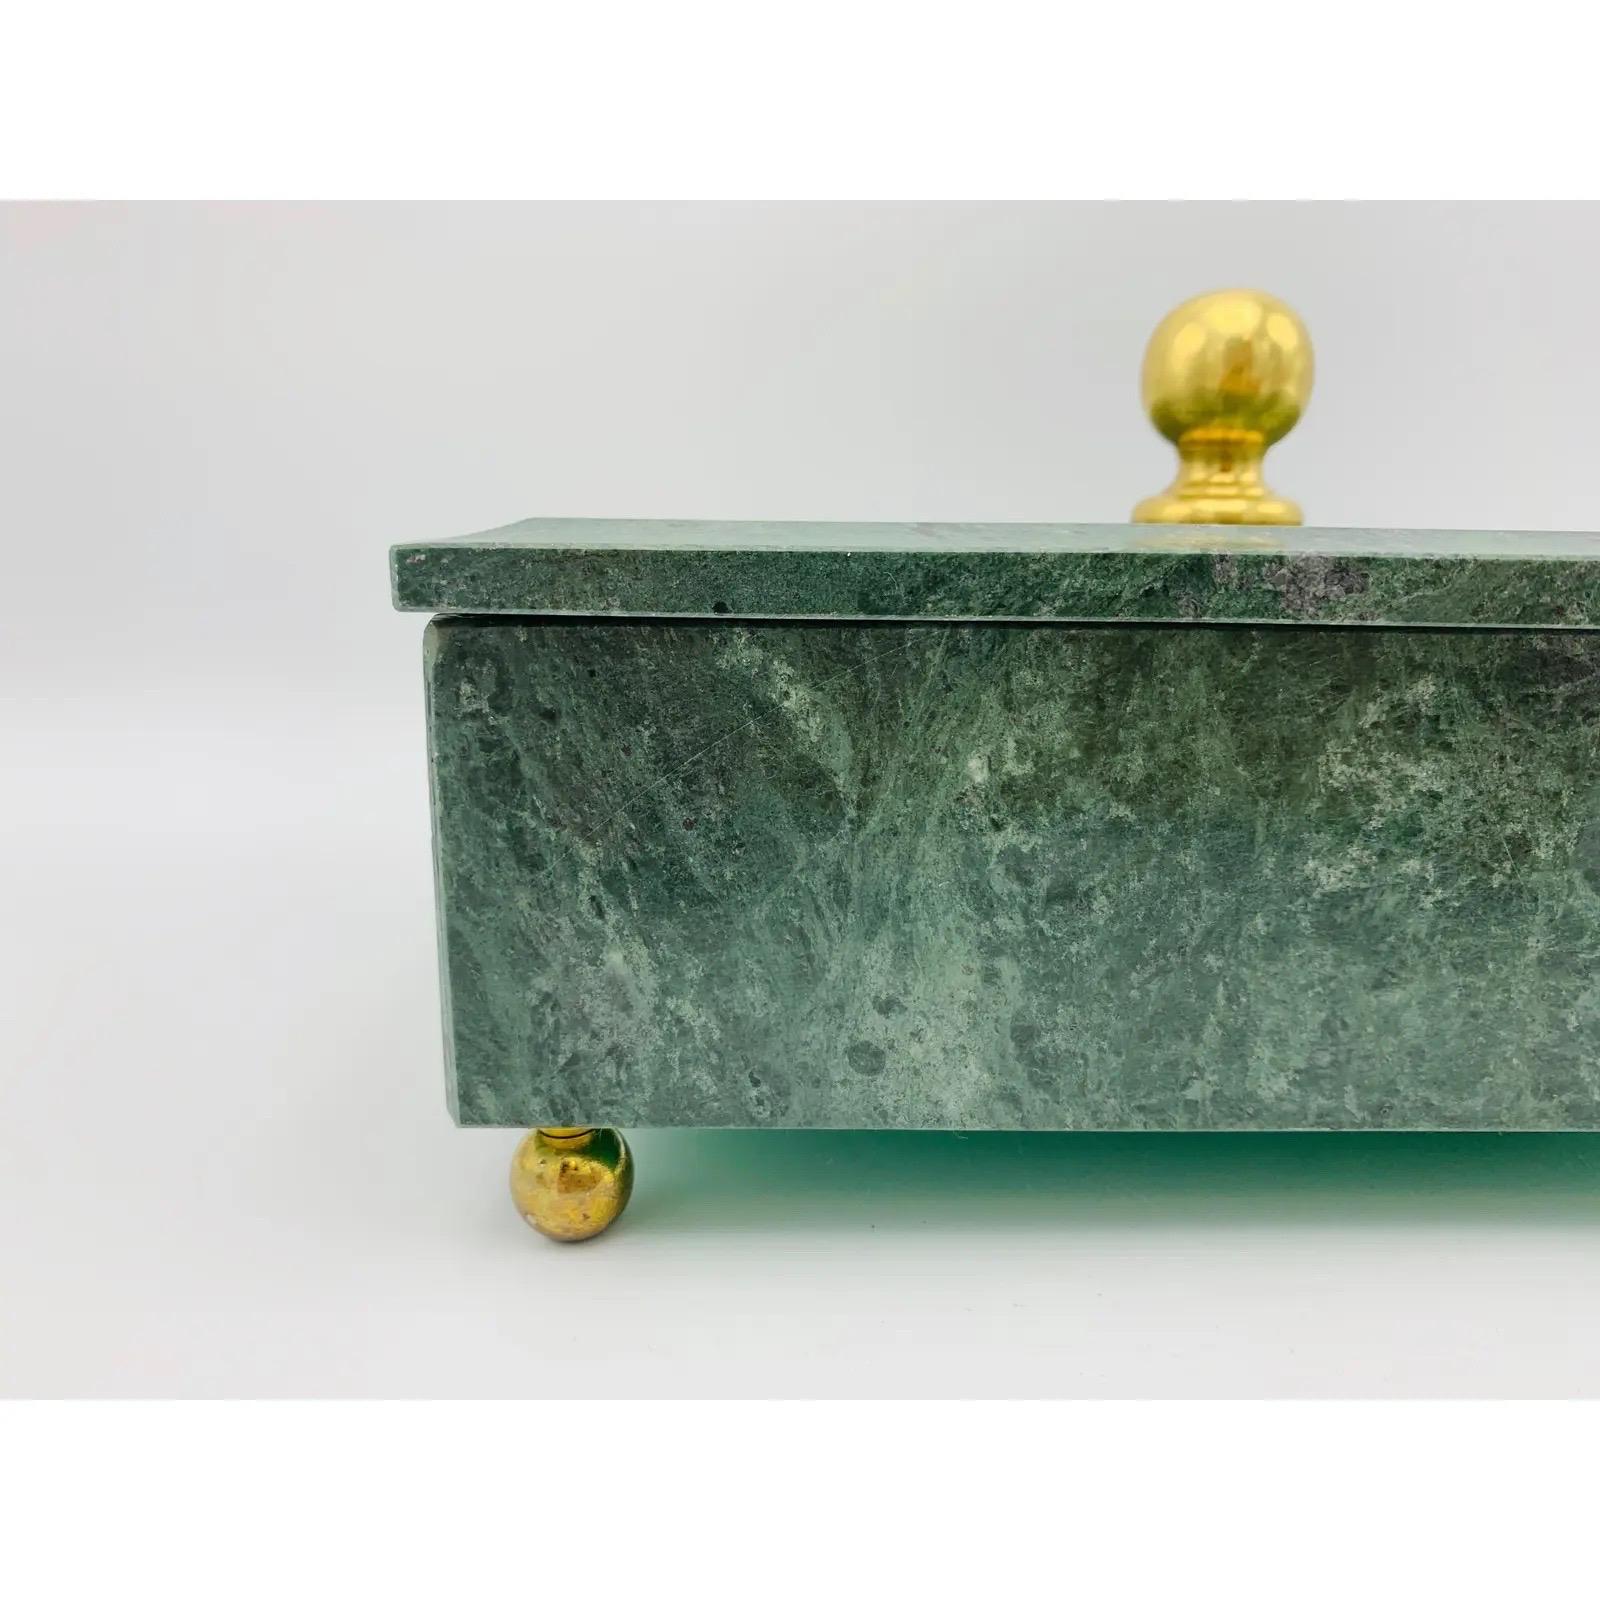 Listed is a stunning, 1960s Italian marble and brass footed box. The piece has small, polished solid-brass balled feet at each corner with a larger, ball on the lid. Incredibly heavy for its size, weighing 4.2lbs.

Dimensions:
Interior: 1.88